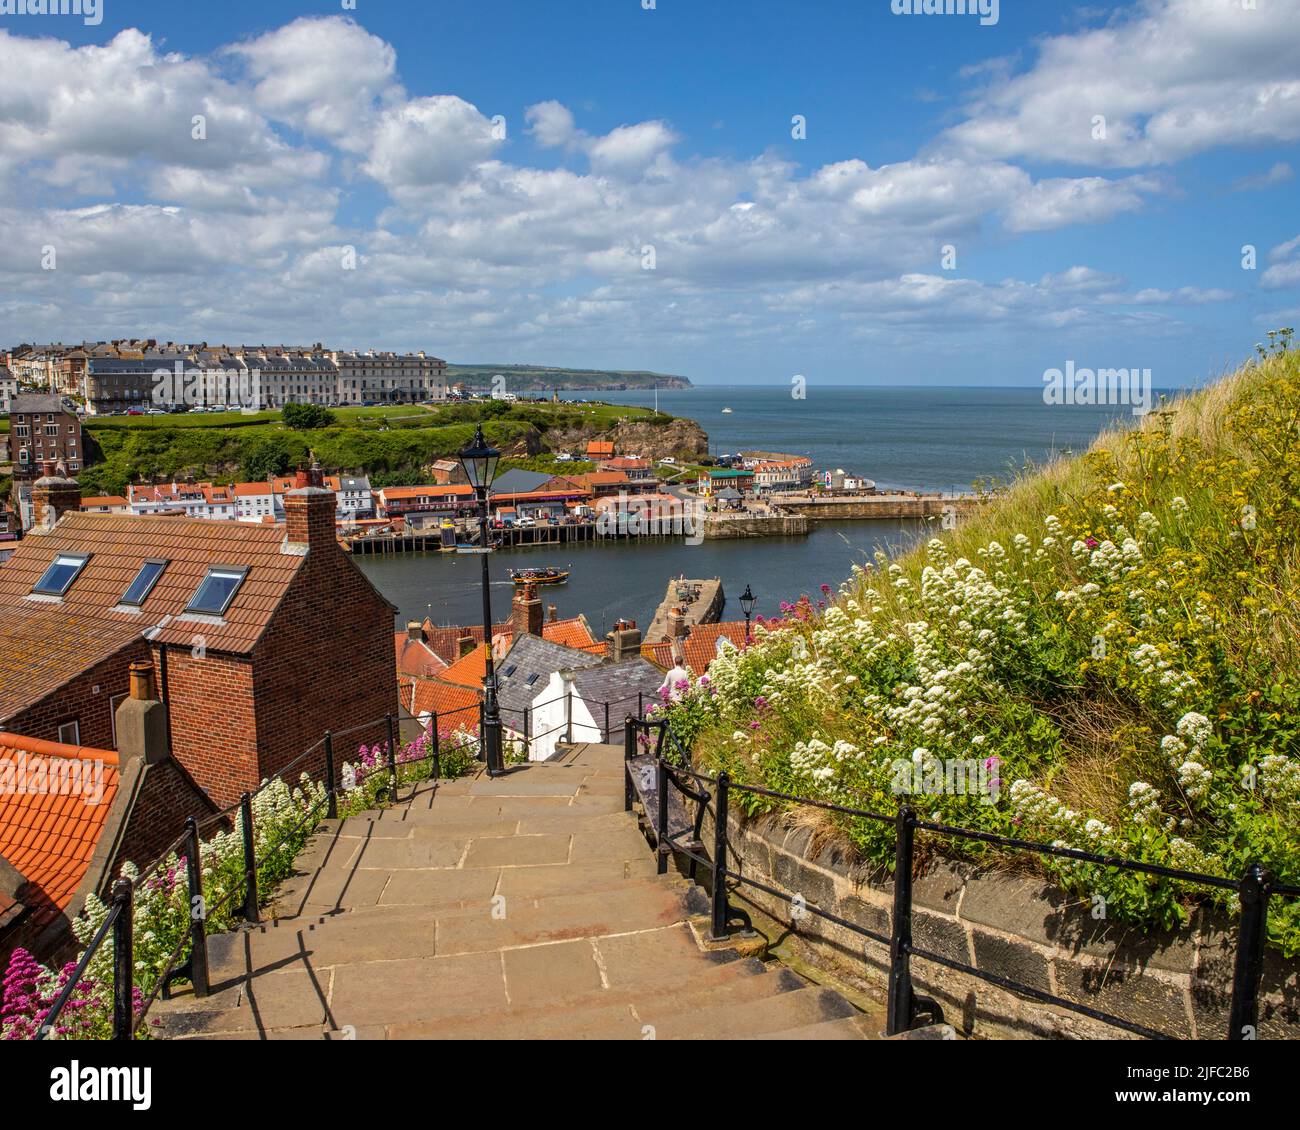 The stunning view from the 199 Steps, looking over the seaside town of Whitby in North Yorkshire, UK. Stock Photo